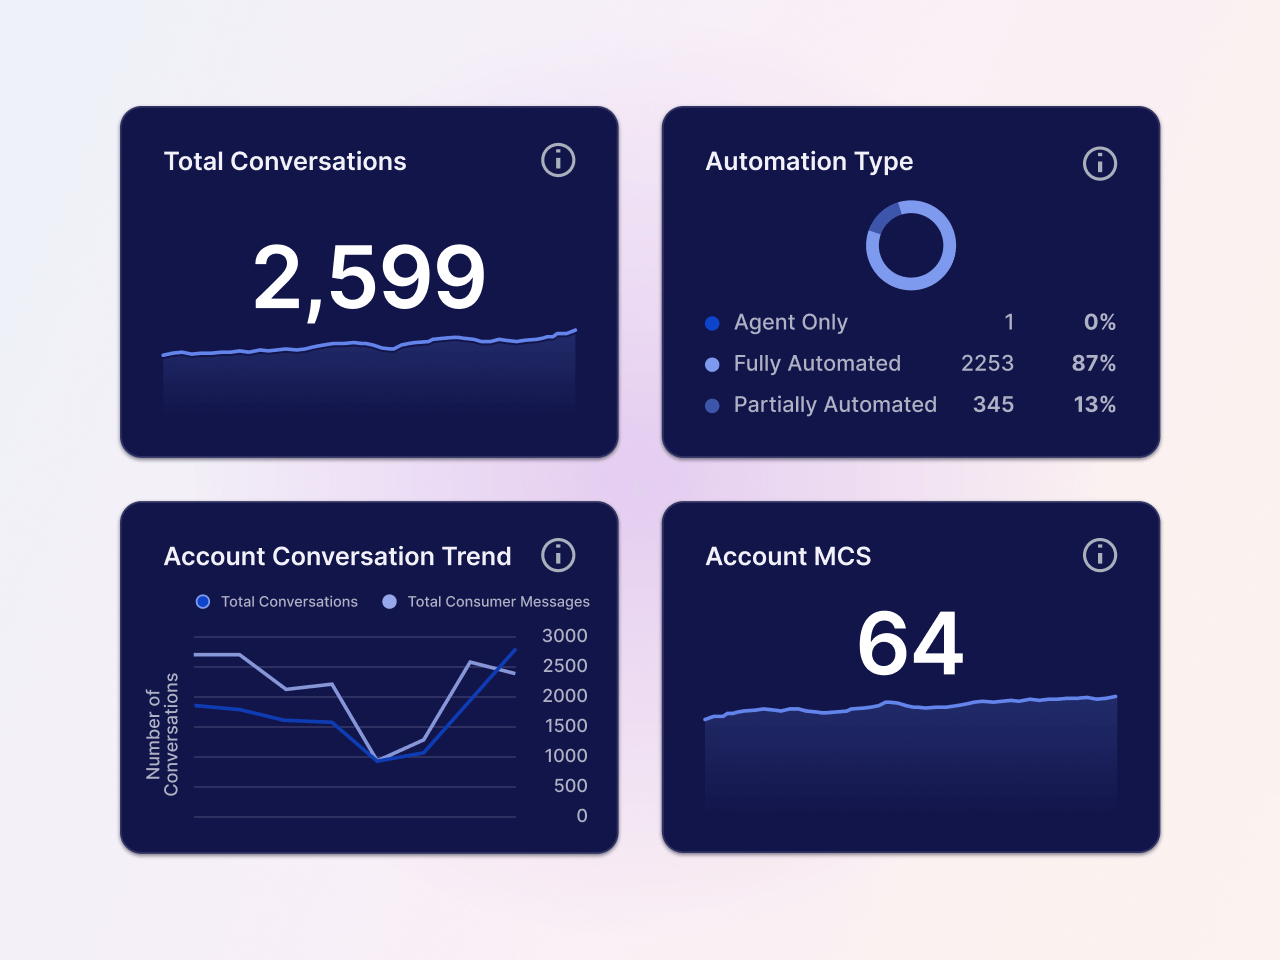 screenshots of 4 dashboards from our conversation intelligence platform analyzing customer interactions, sales calls, and more